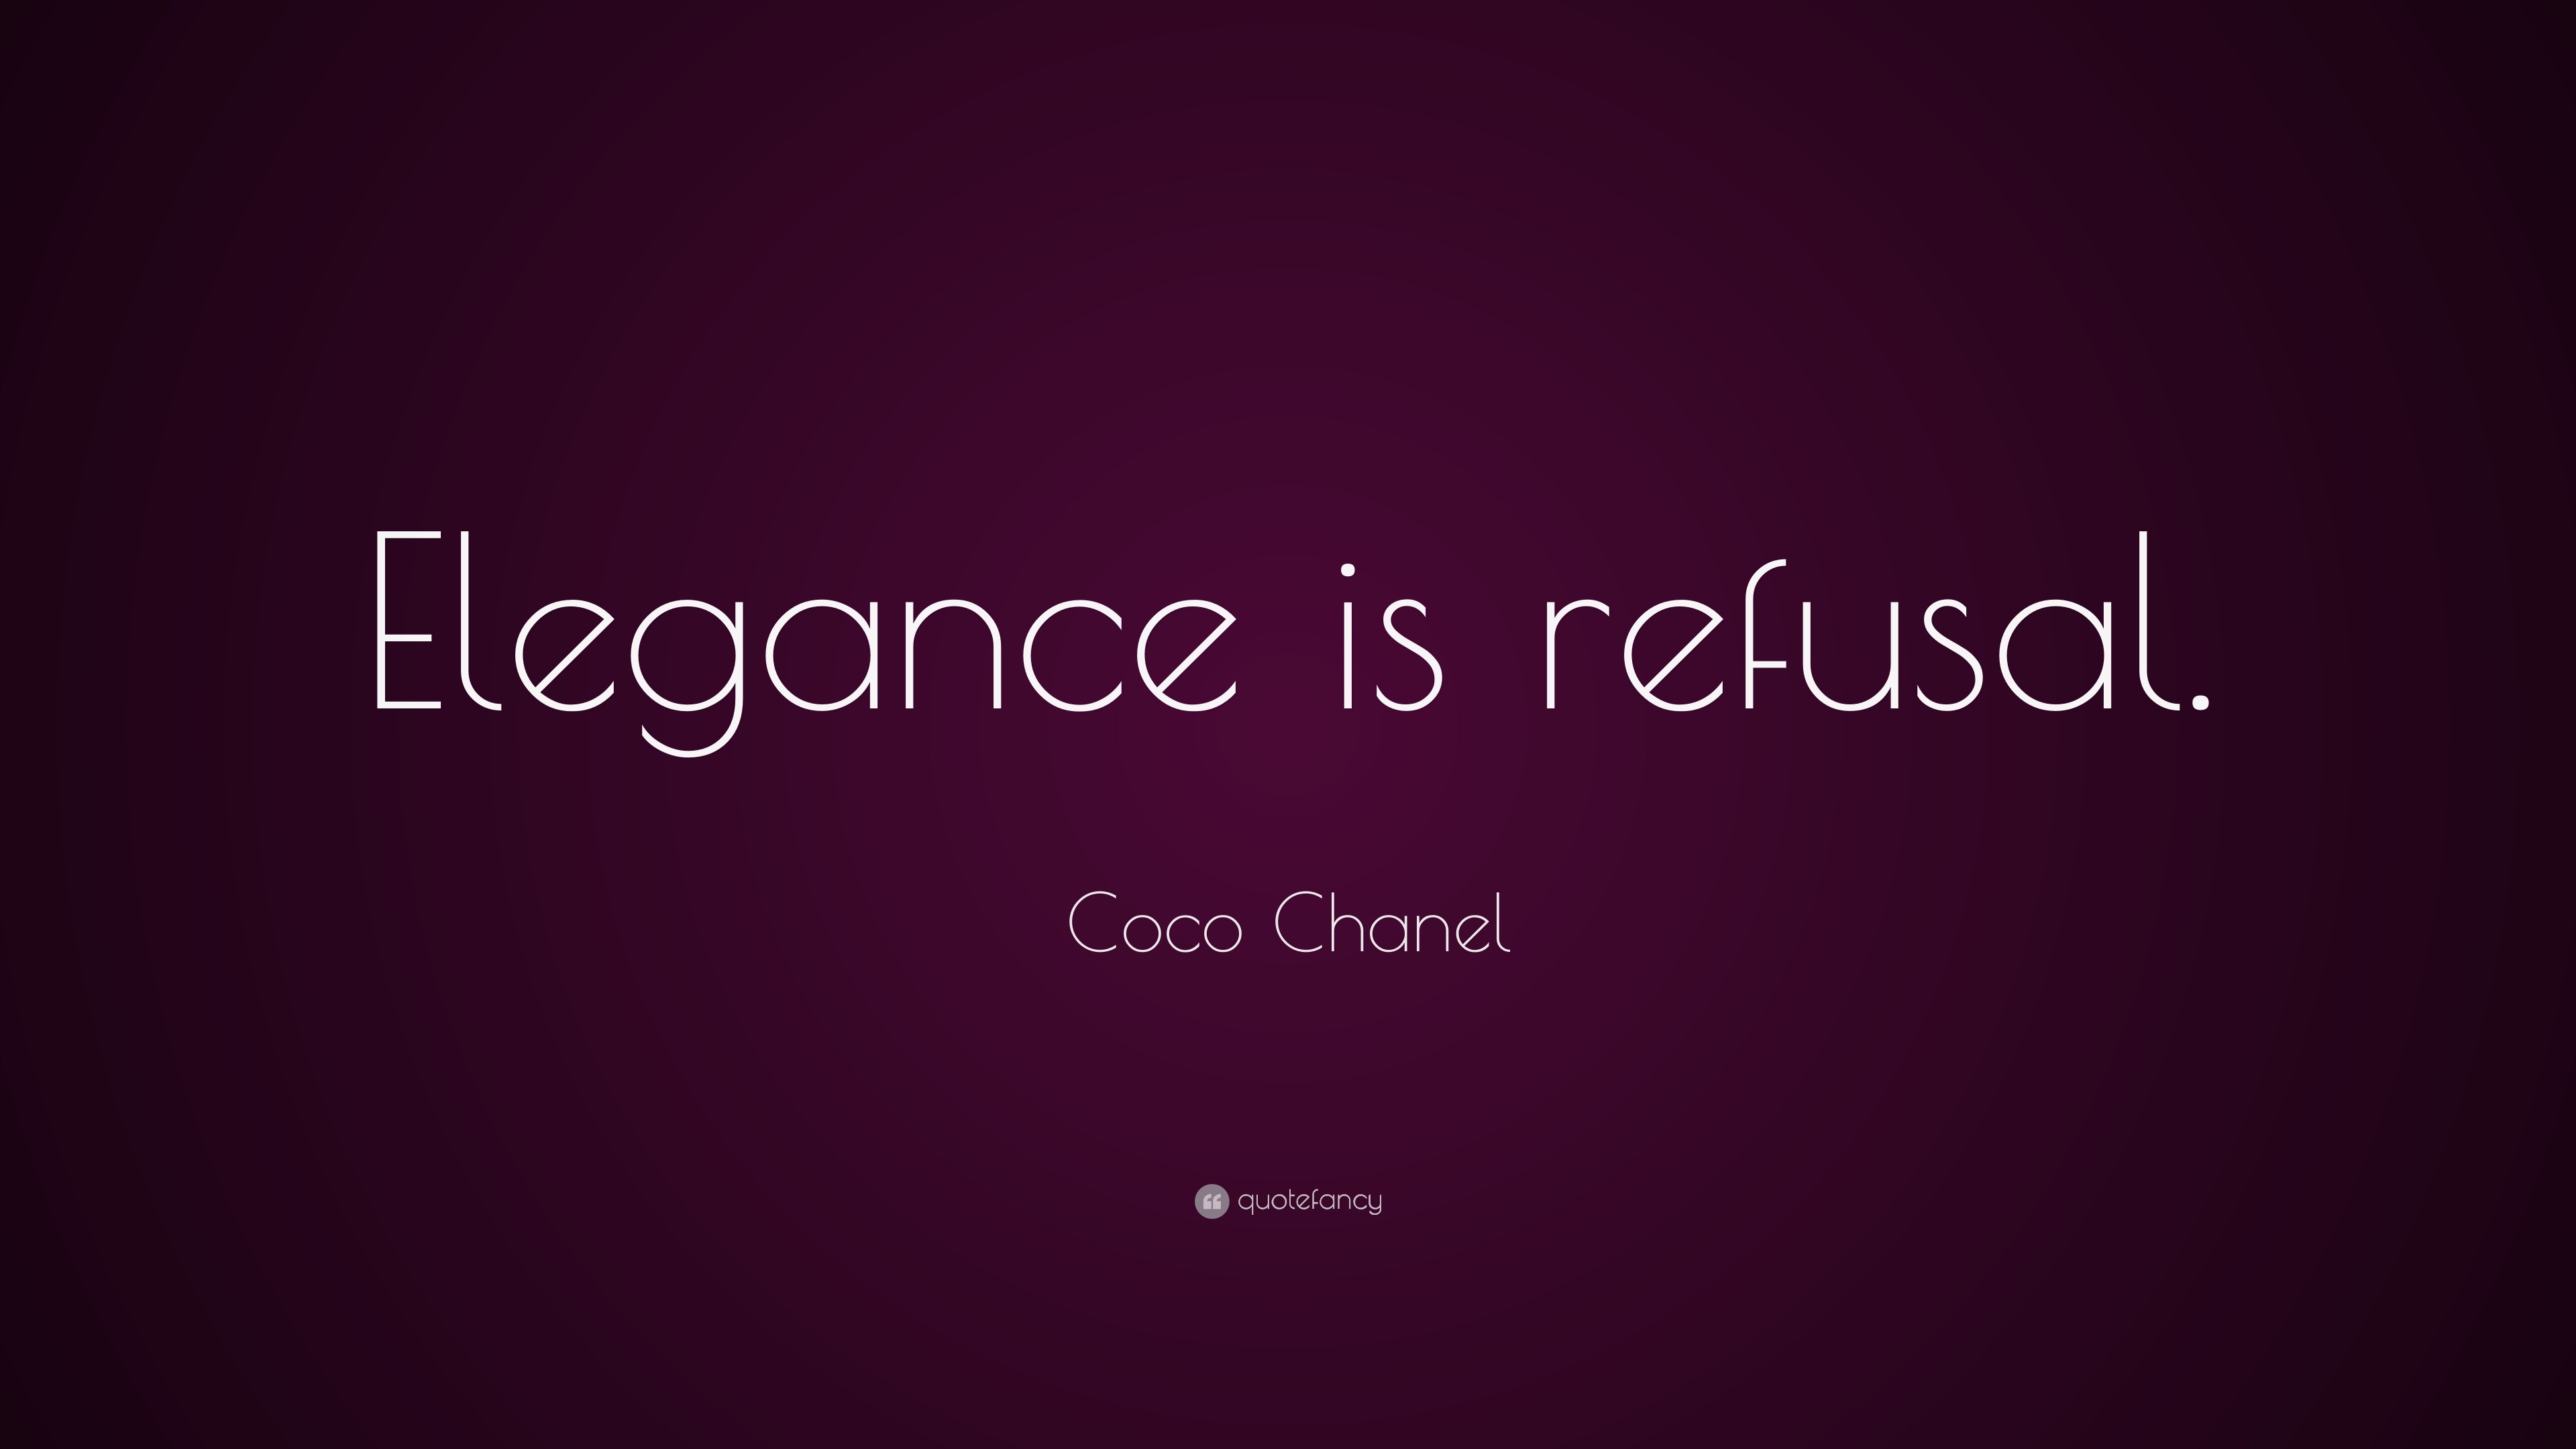 quotes chanel tumblr coco Quote: is wallpapers Chanel (5 â€œElegance refusal.â€ Coco